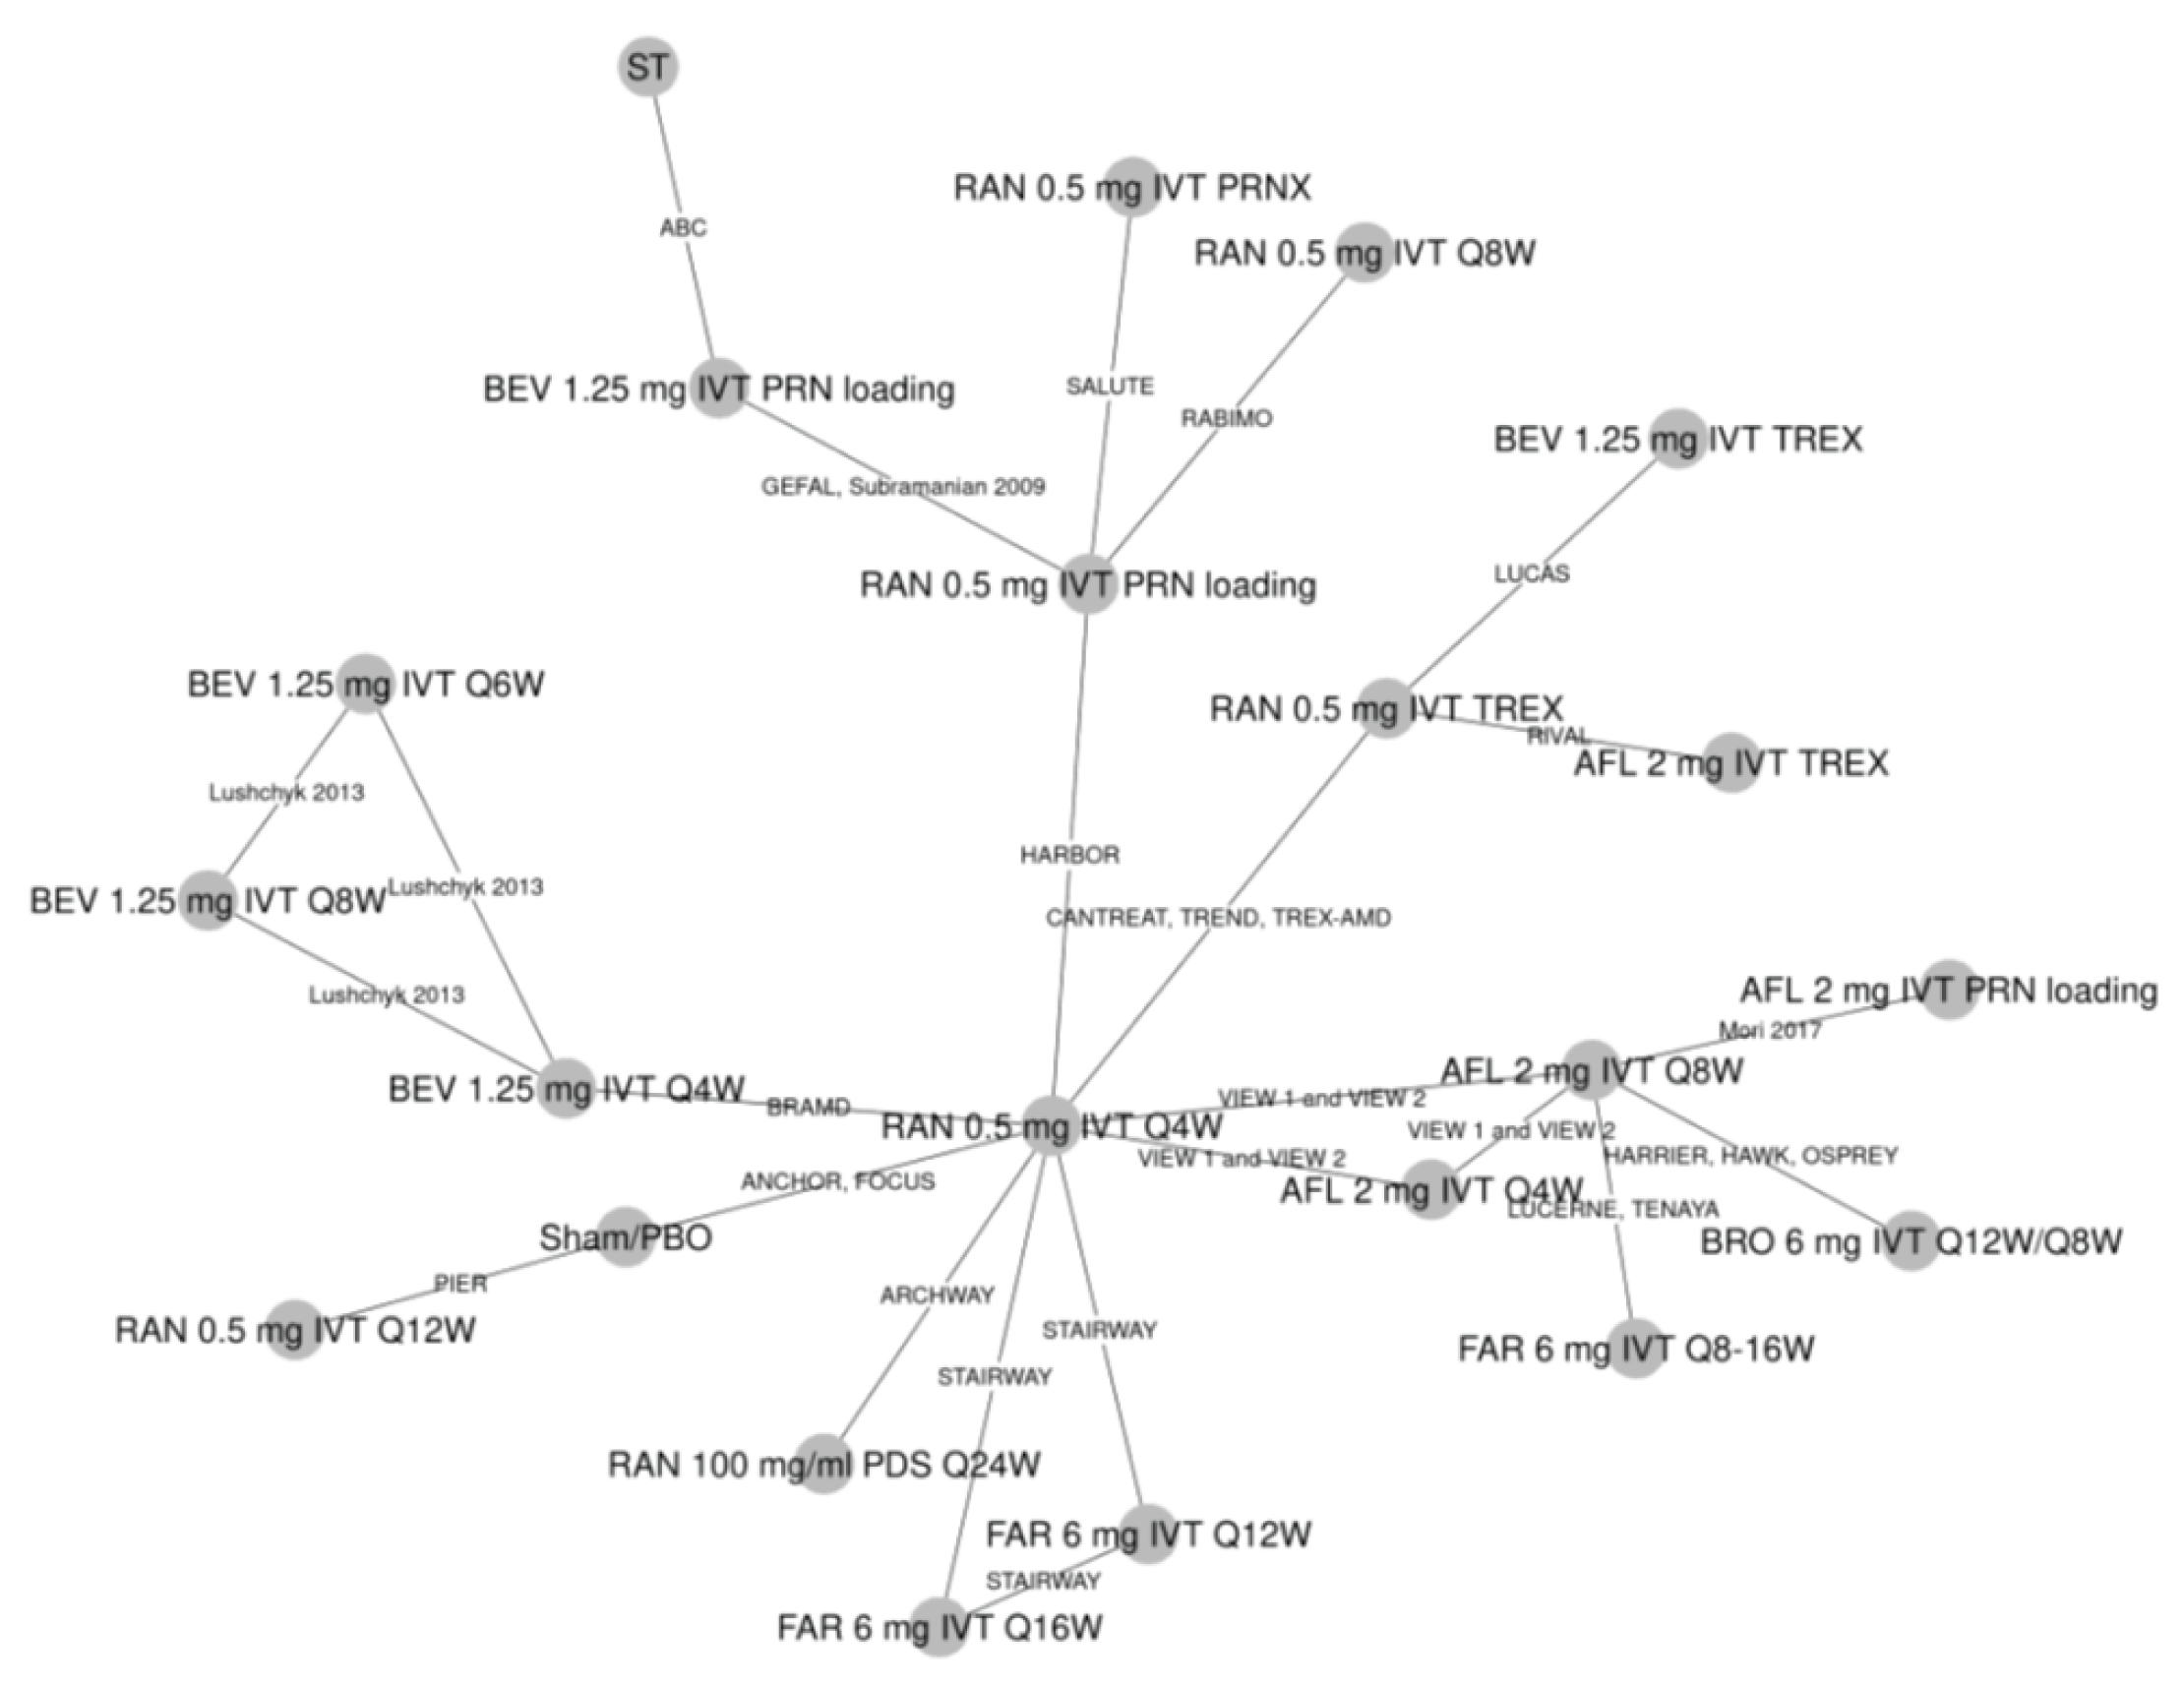 31 trials reported on the outcome of treatment discontinuation at 12 months and were connected in a network. There are 2 connected star diagrams with 5 or more connections: RAN 0.5 mg IVT every 4 weeks and AFL 2 mg IVT every 8 weeks. Faricimab was connected to aflibercept through the TENAYA and LUCERNE trials and connected to ranibizumab 0.5 mg IVT every 4 weeks through the STAIRWAY trial.